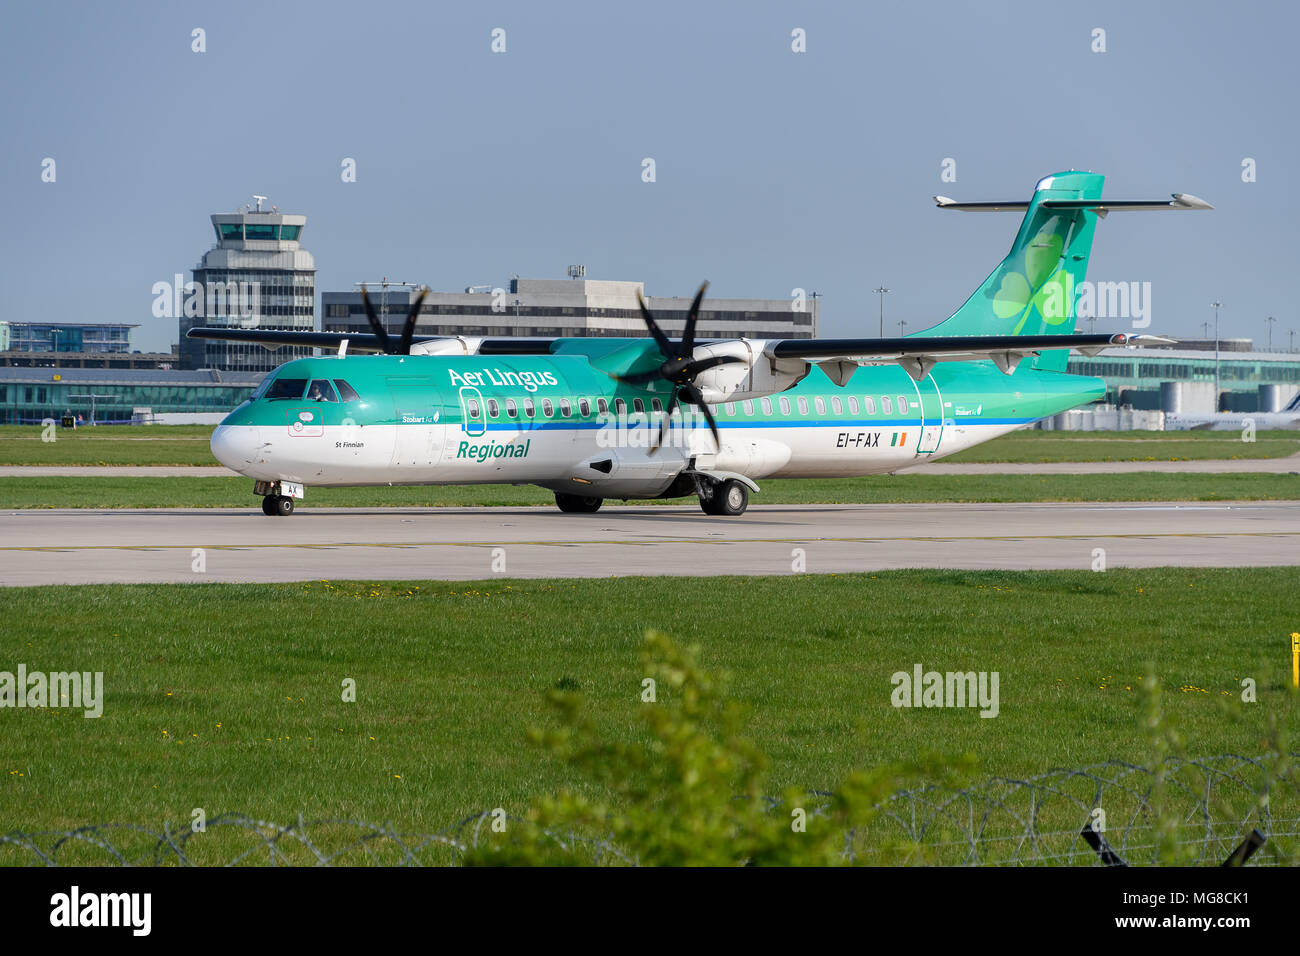 MANCHESTER, UNITED KINGDOM - APRIL 21st, 2018: Aer Lingus ATR 72-600 ready to depart at Manchester Airport Stock Photo